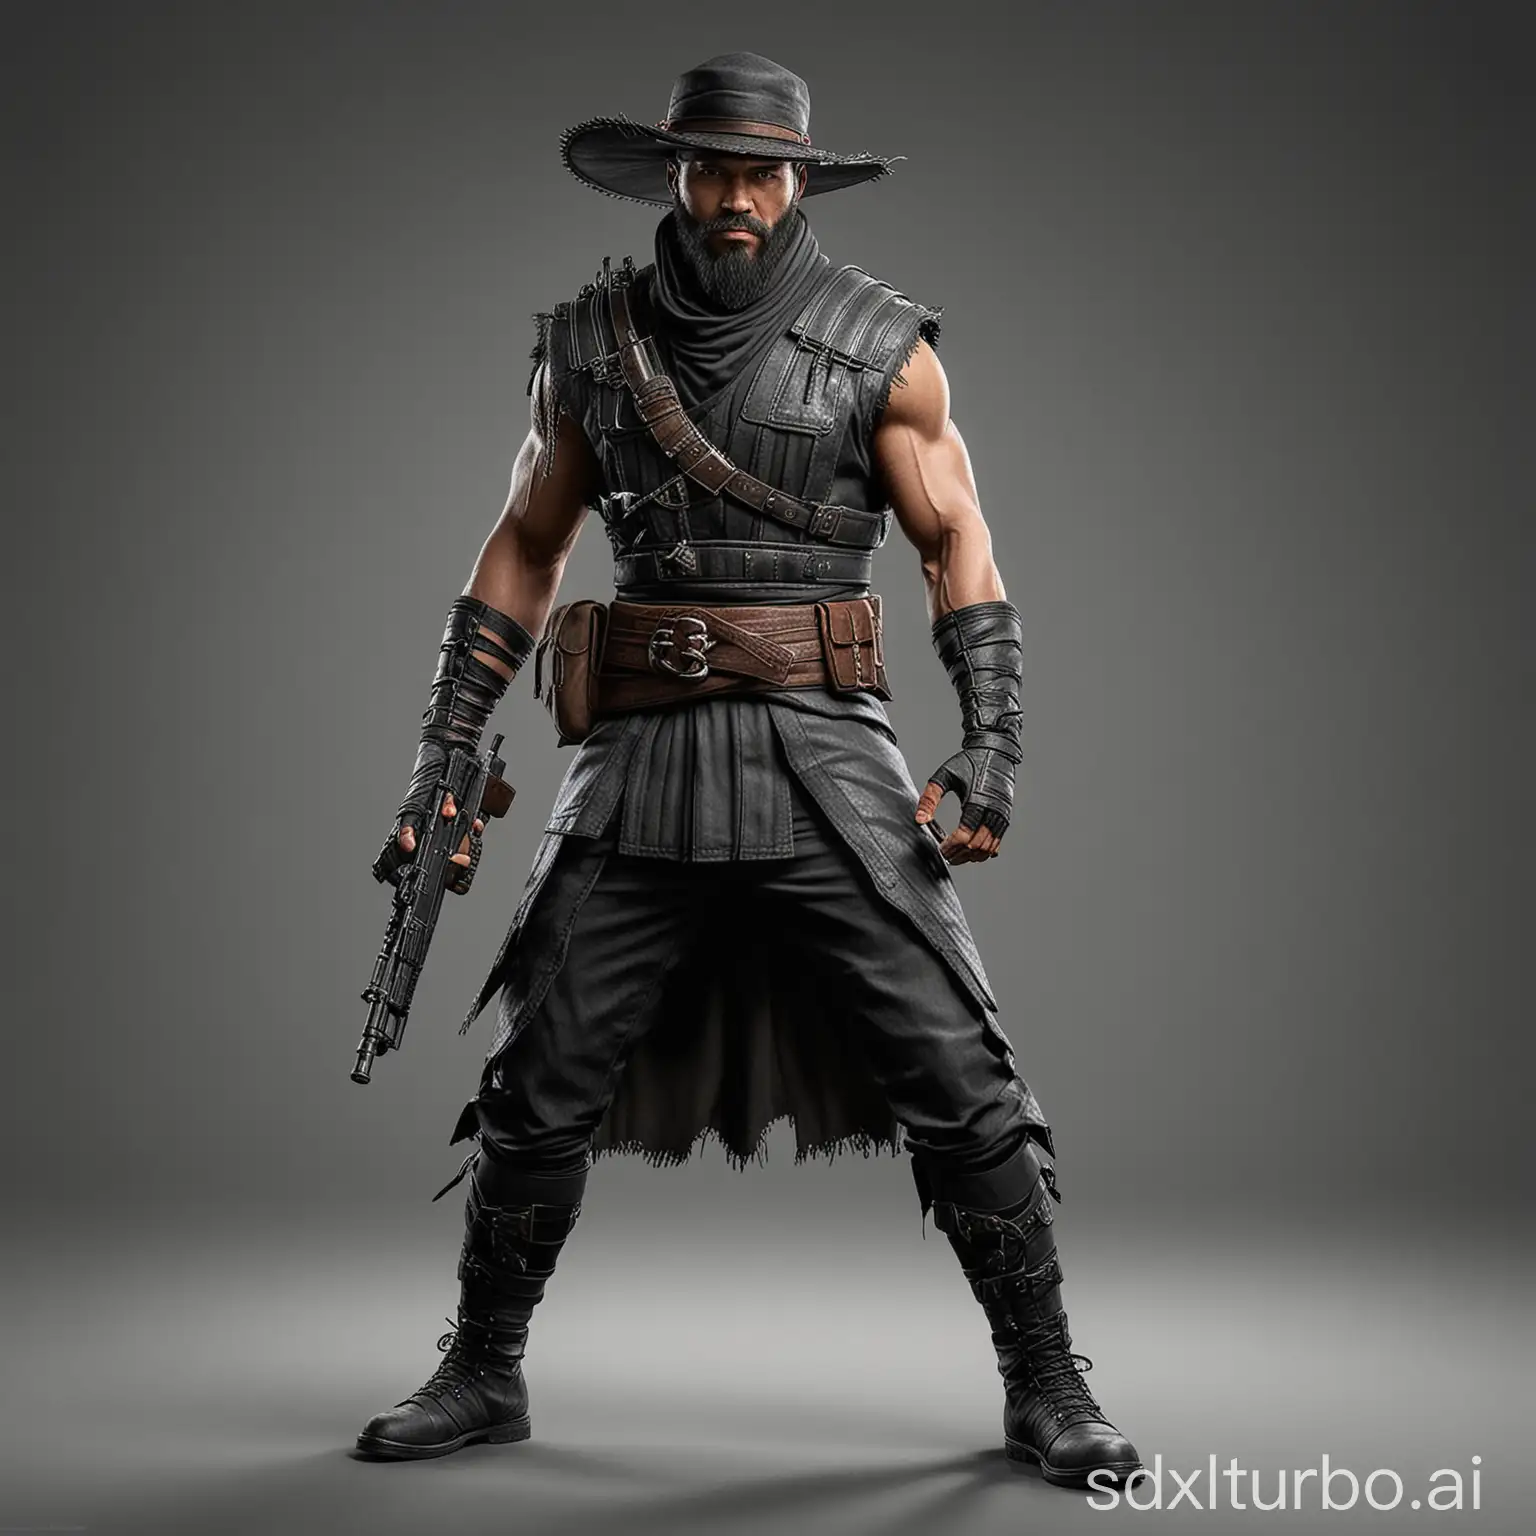 On a plain bacground is a A bearded kung lao mortal kombat holding an assault rifle pubg with full armor in a full body portrait. This is a full body photo realistic high resolution image with sharp clean subject focus